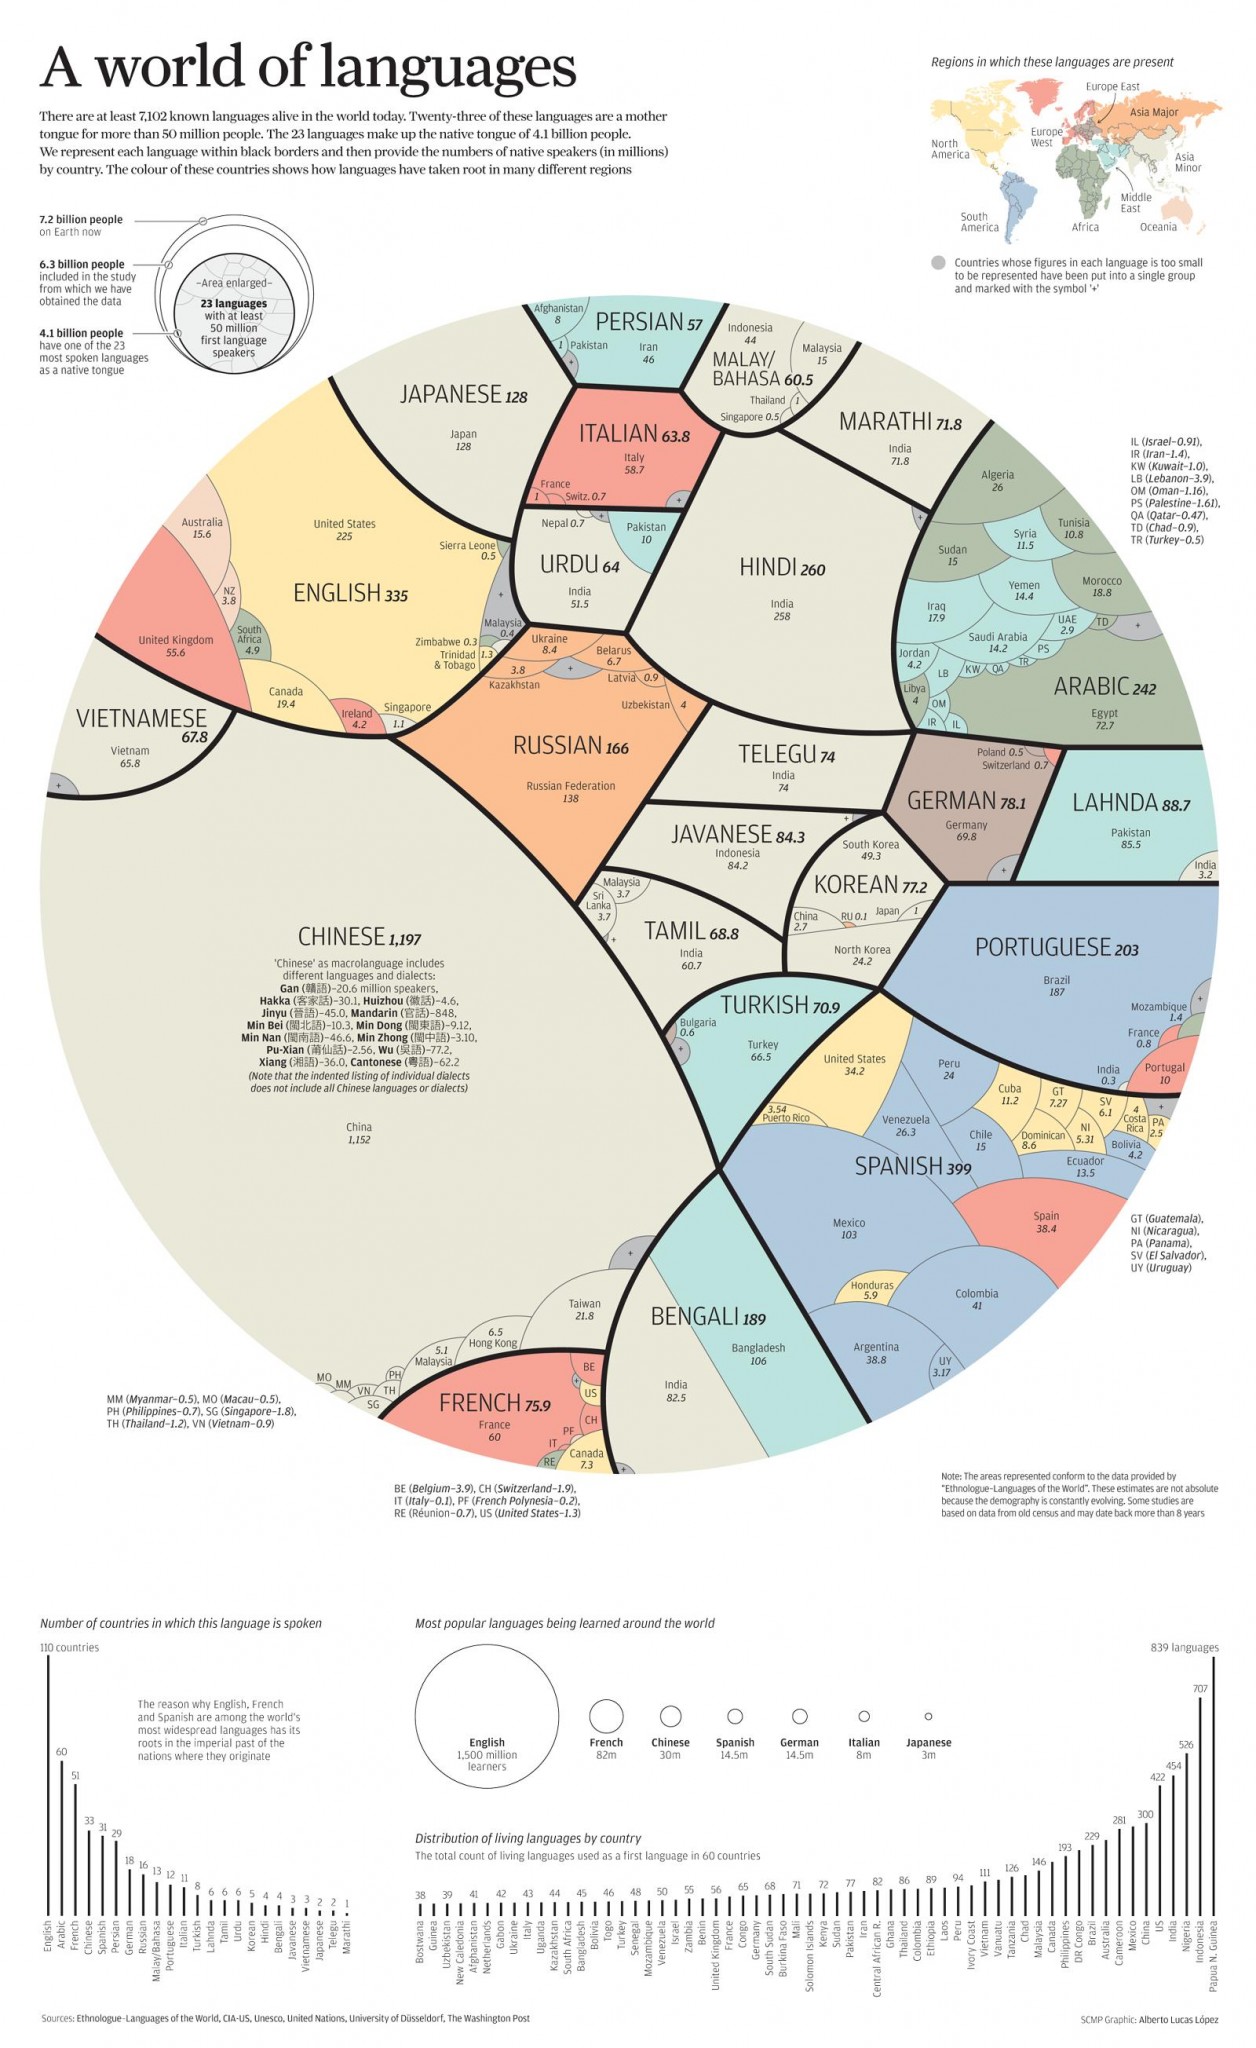 The world's most spoken languages and where they are spoken